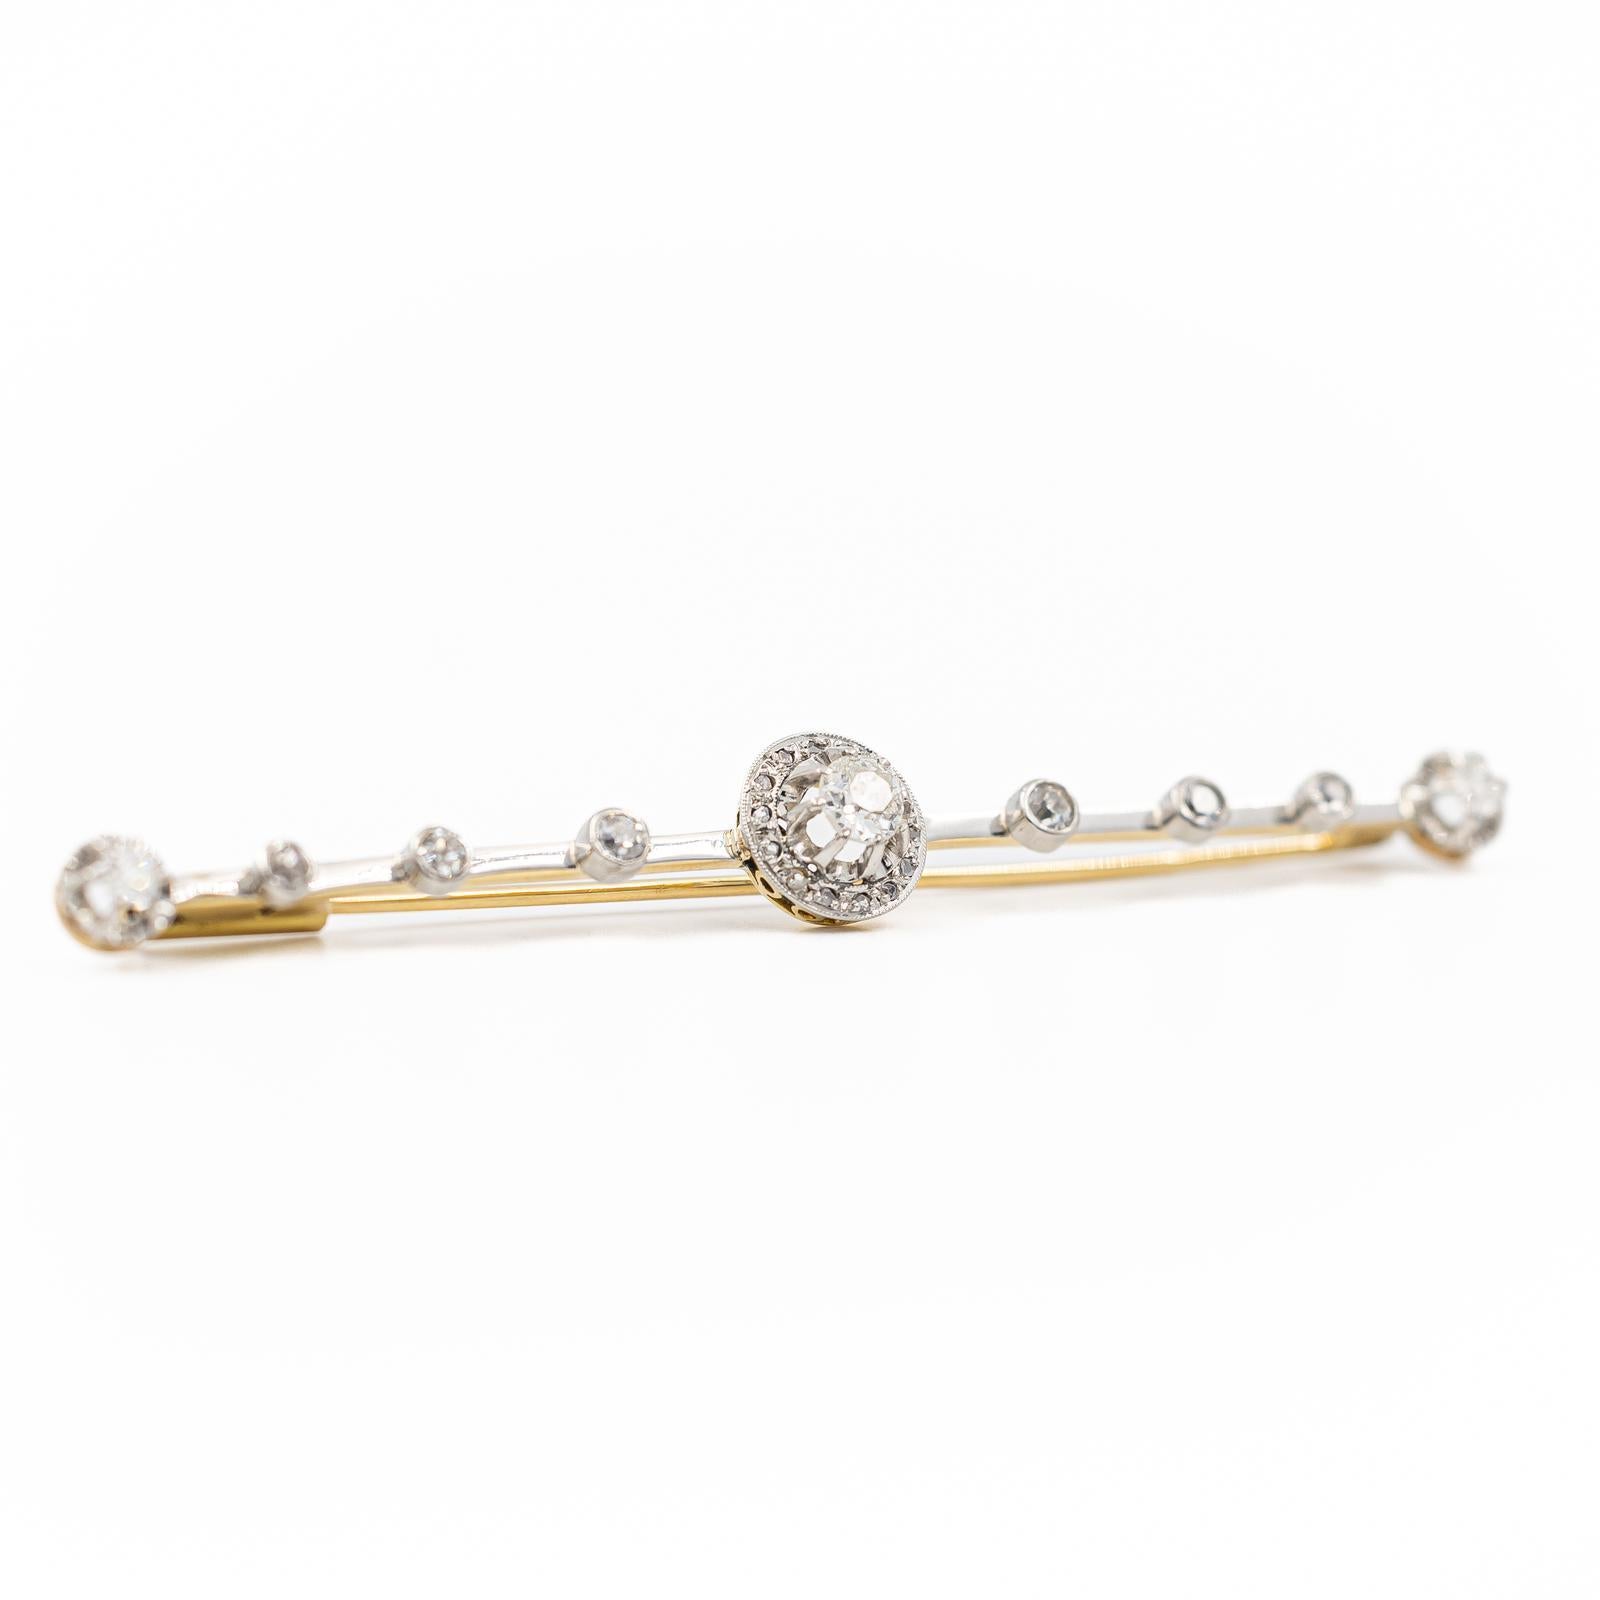 Old European Cut Brooch White Gold Diamond For Sale